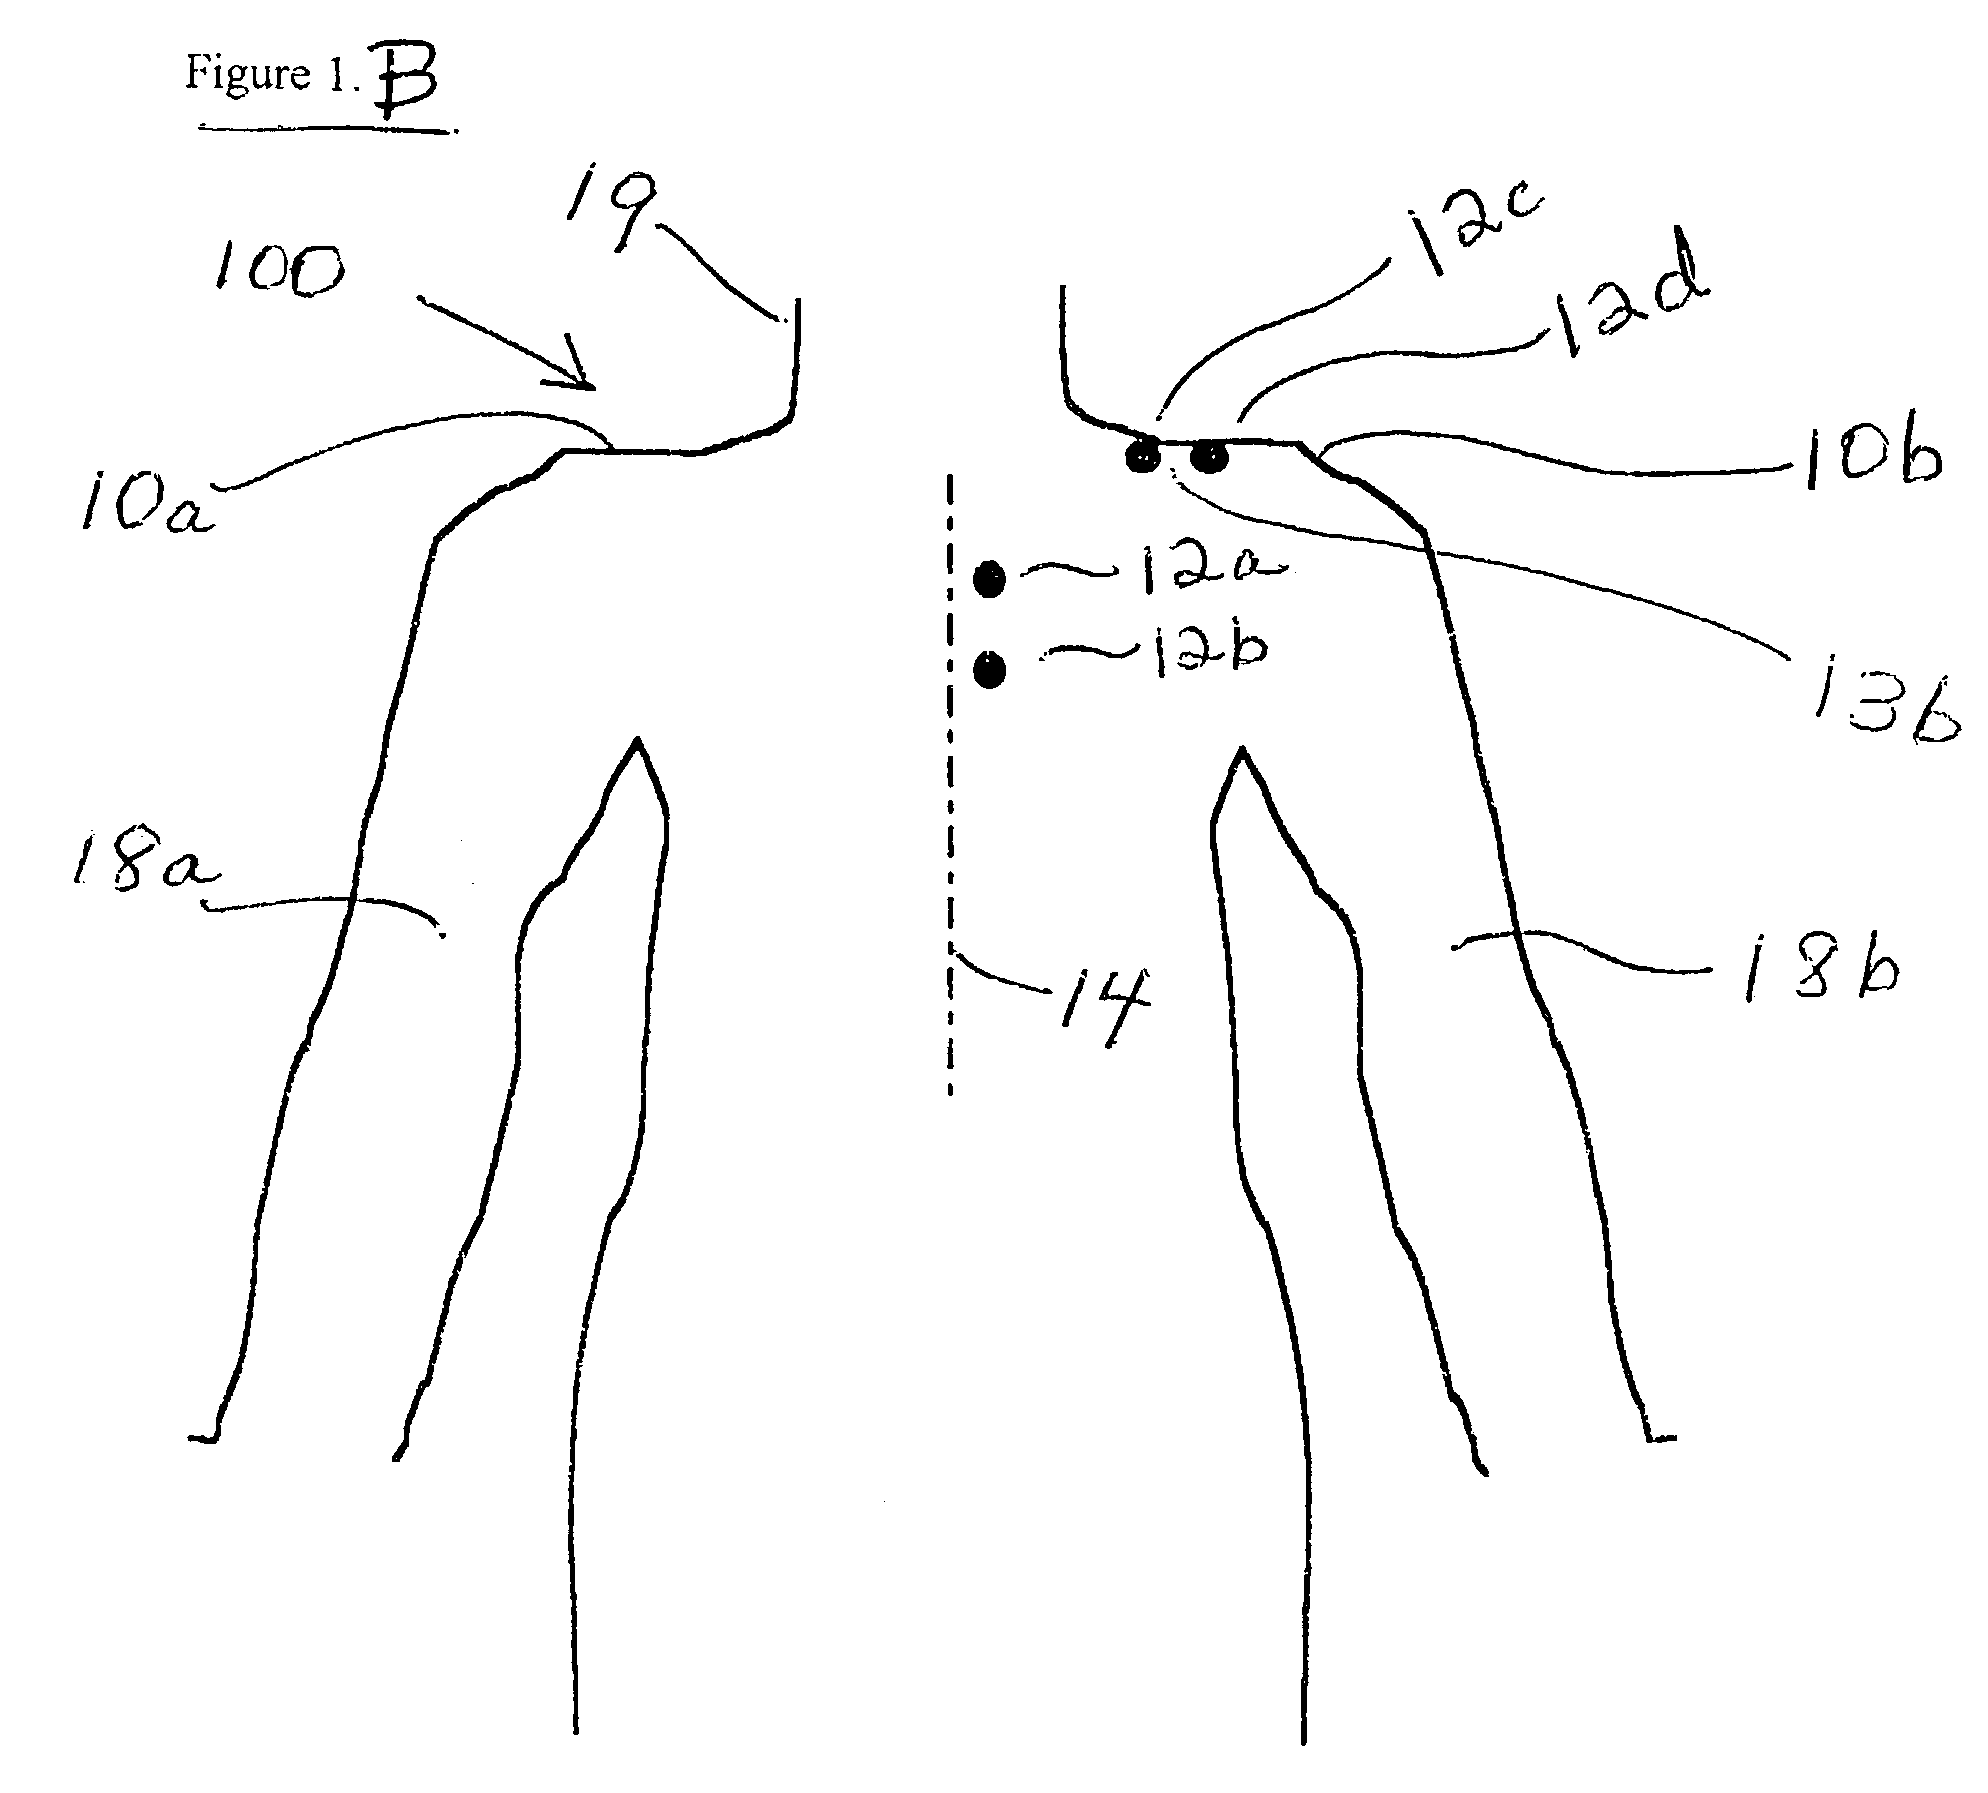 Process for effecting the relaxation of muscles of a human by means of fragrance